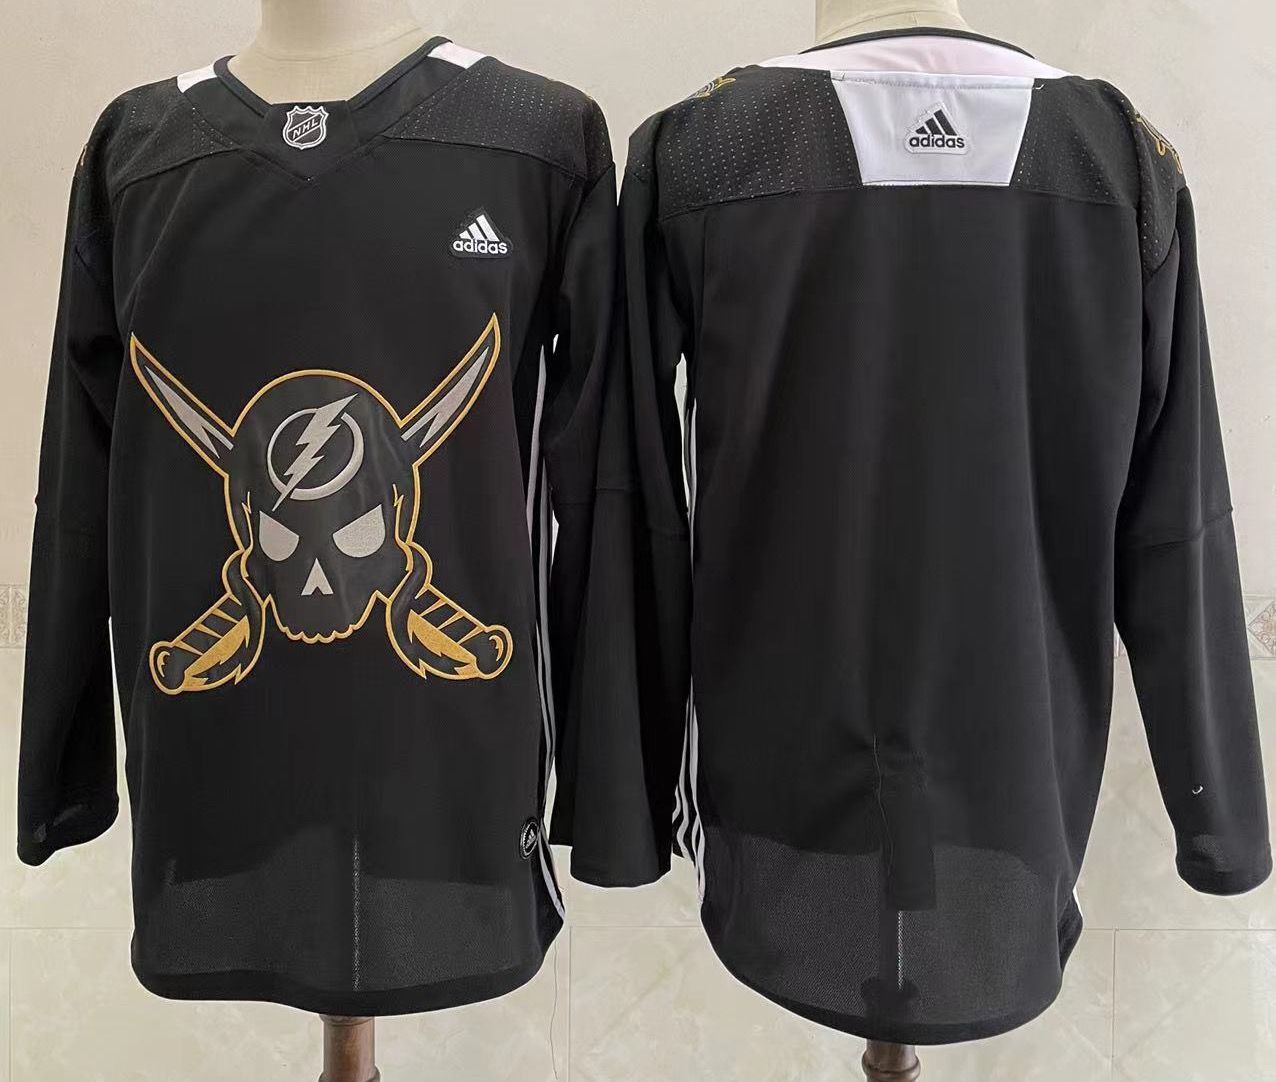 Tampa Bay Lightning Blank Black Pirate Themed Warmup Authentic Jersey